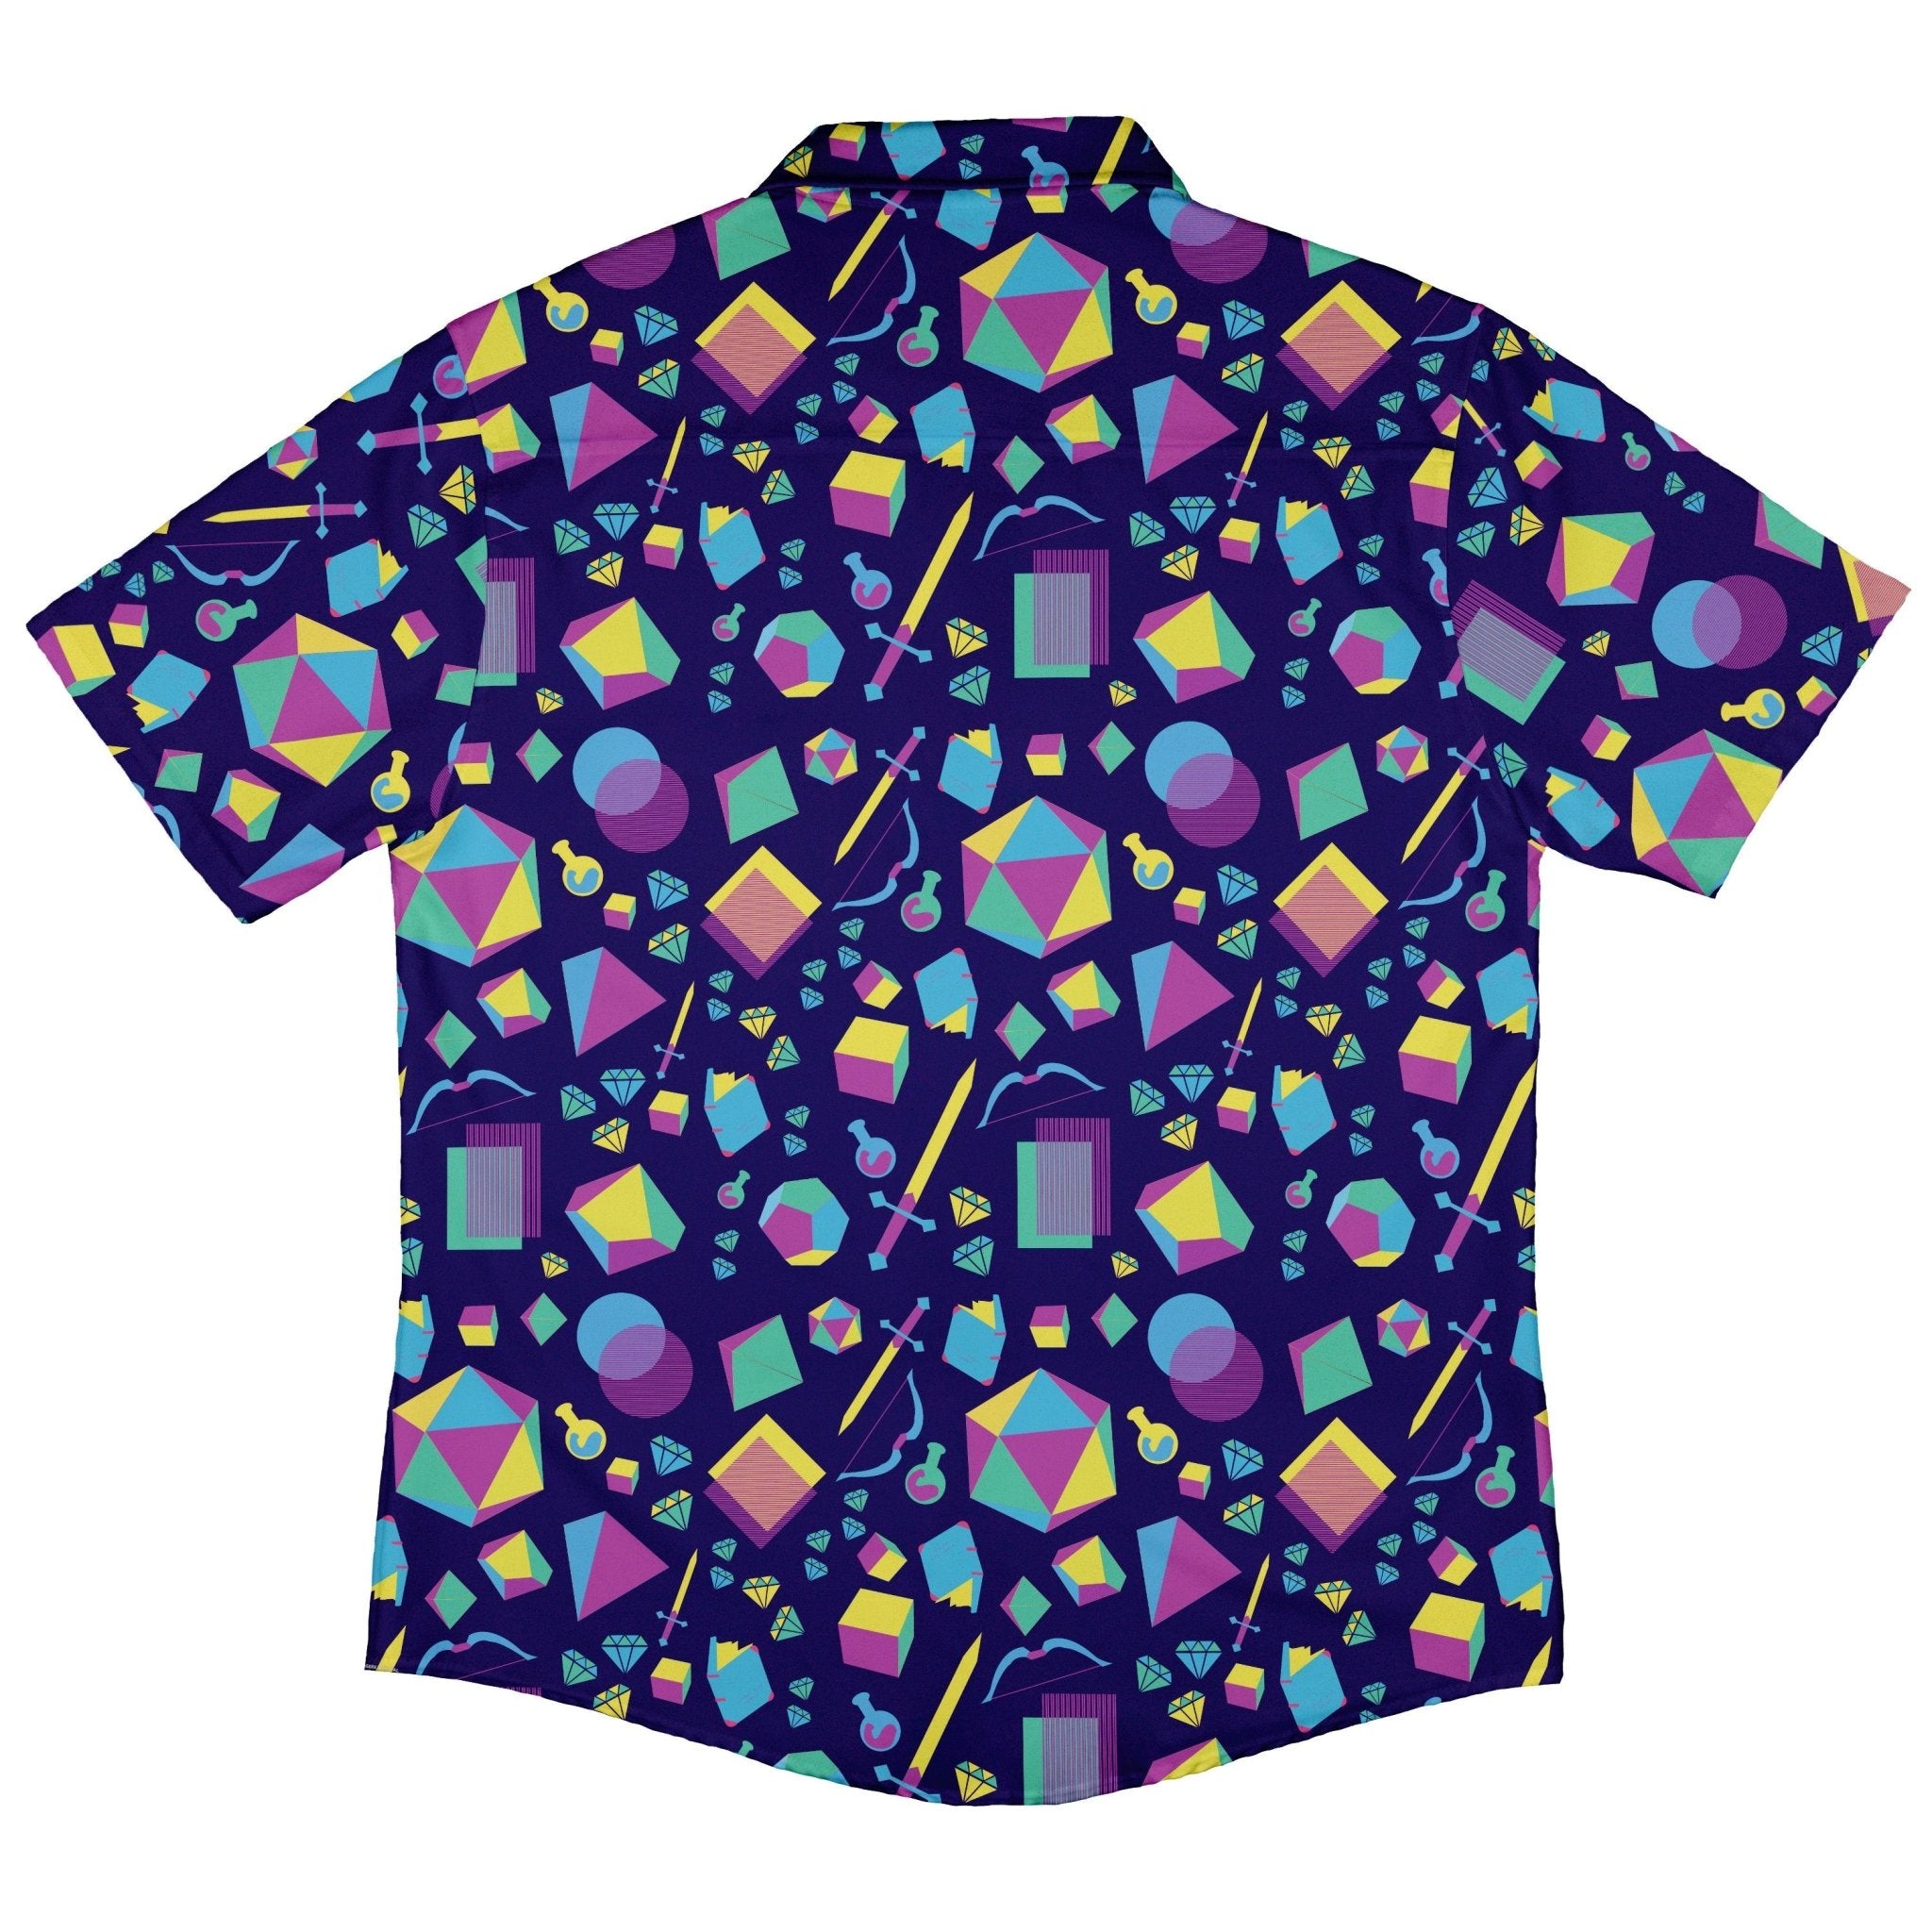 Tabletop RPG Weapons Items Purple Blue Dnd Button Up Shirt - adult sizing - dnd & rpg print - Maximalist Patterns